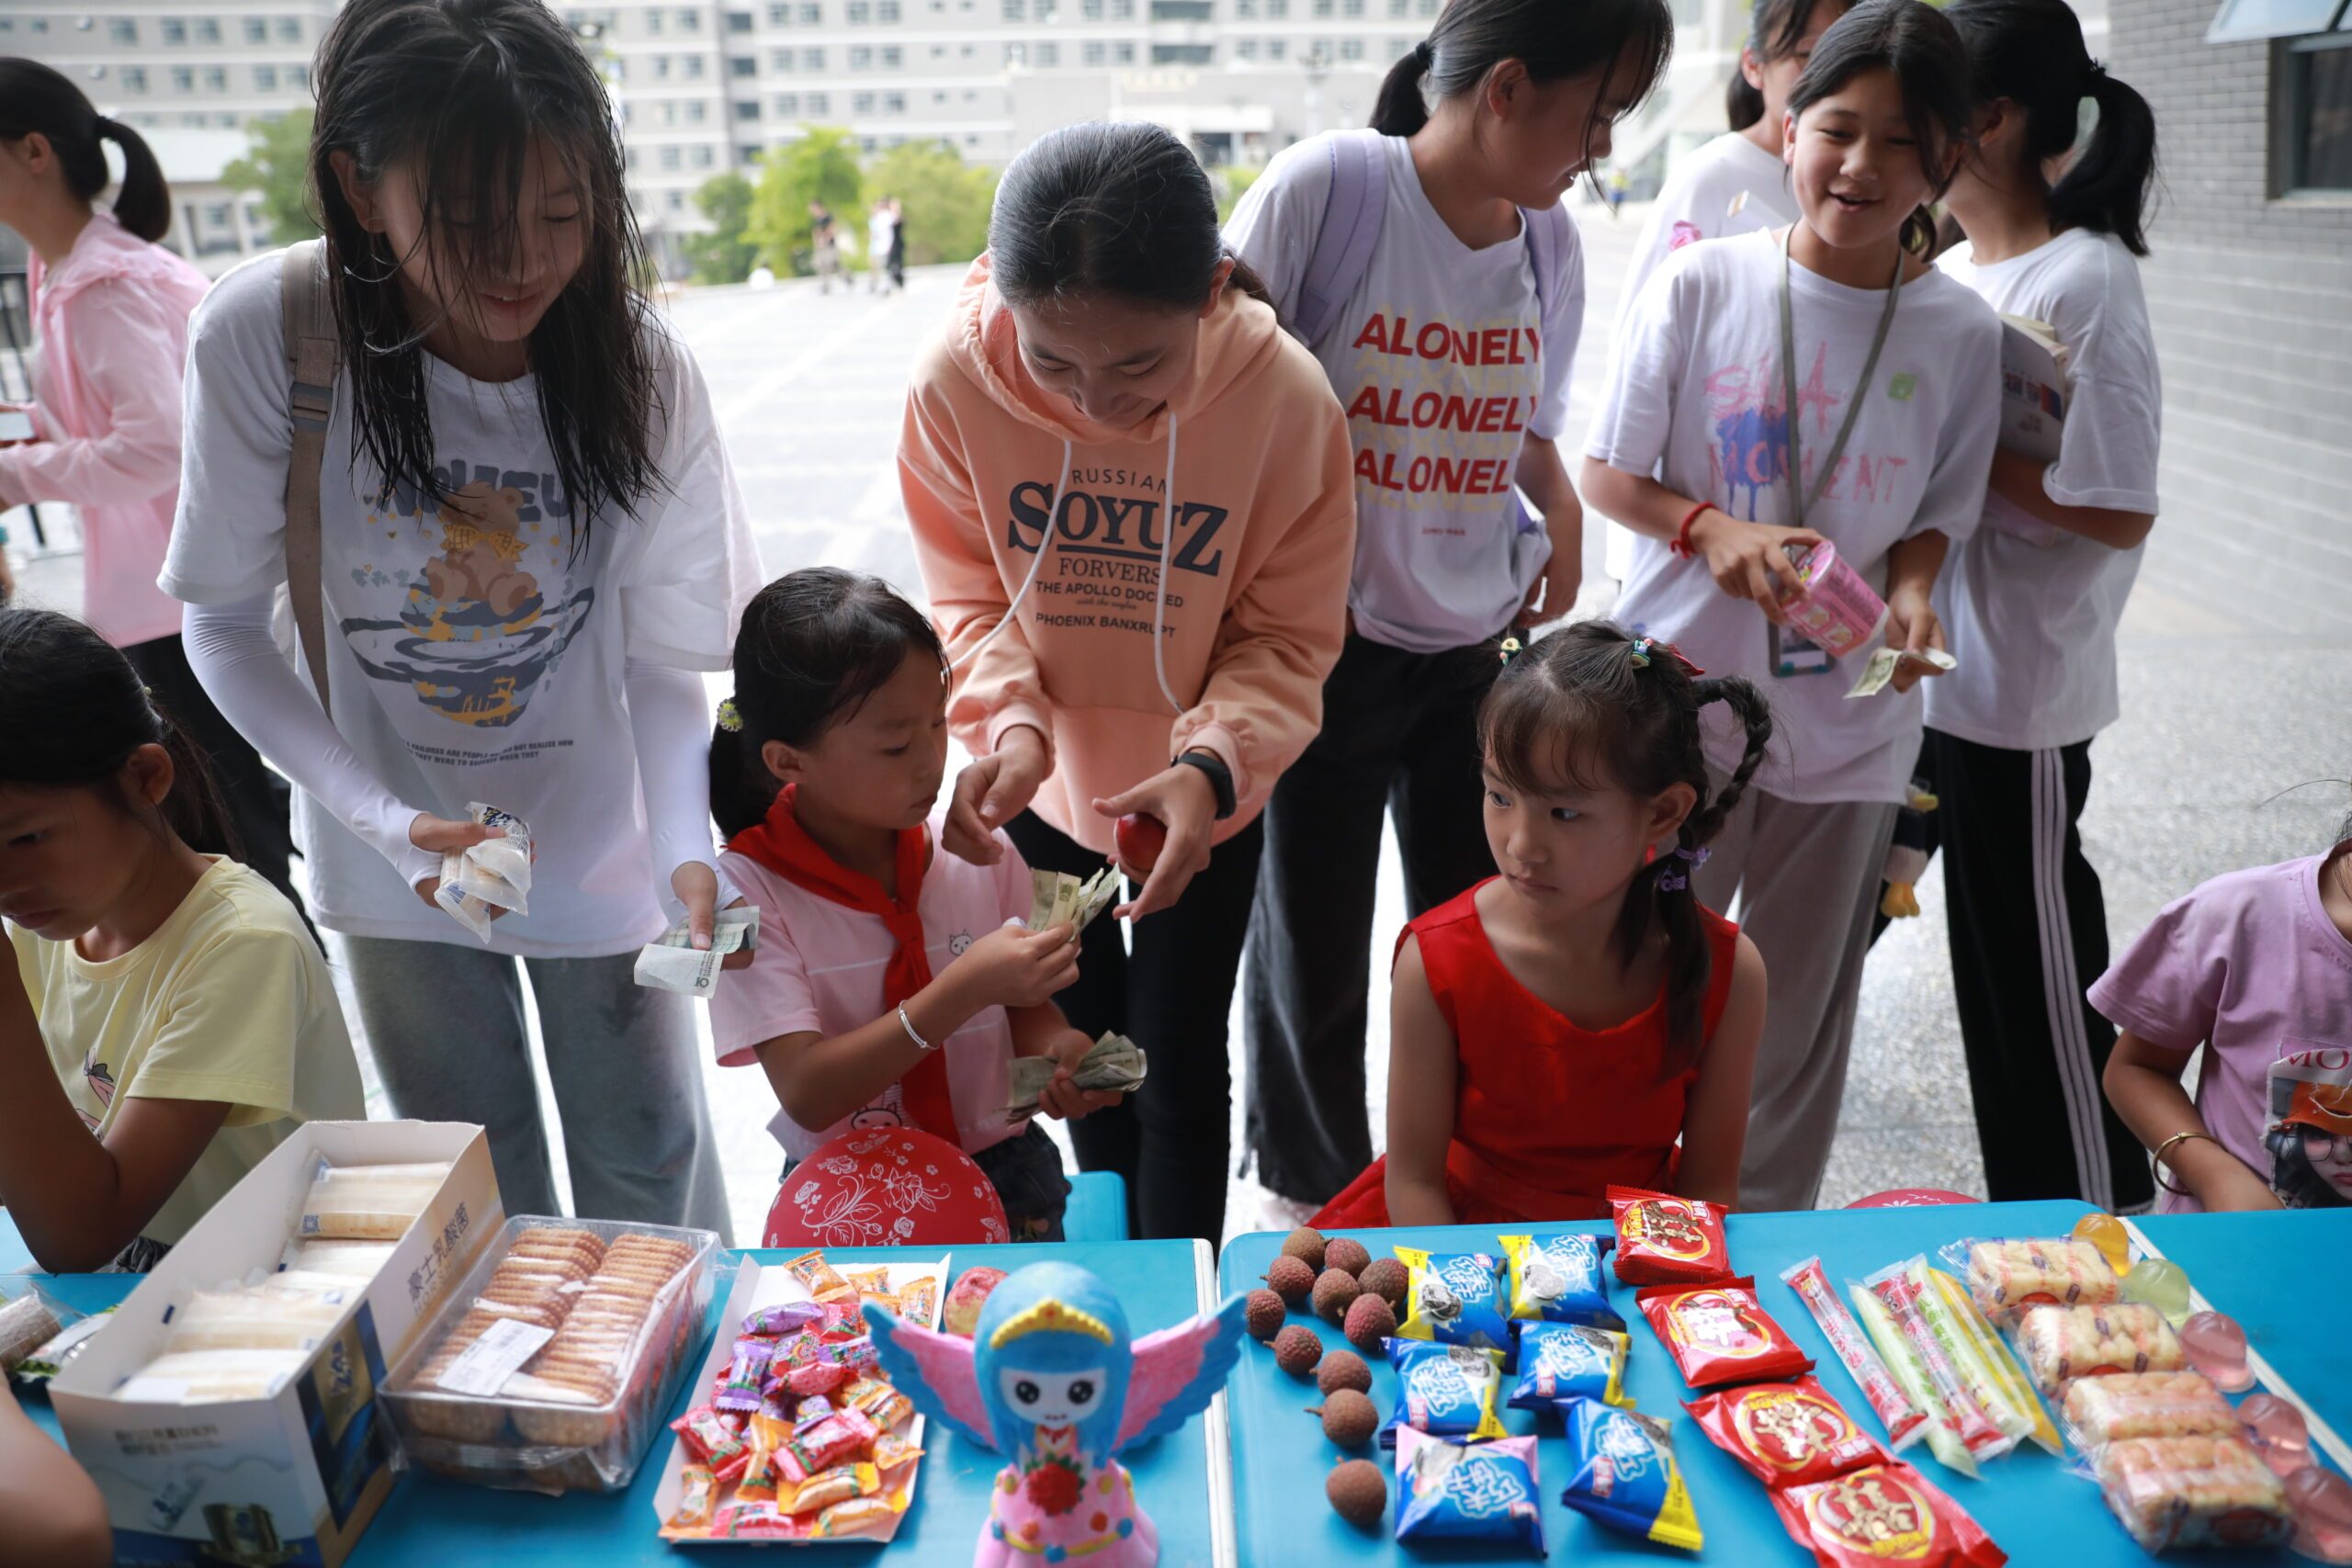 Children selling their products to others at school